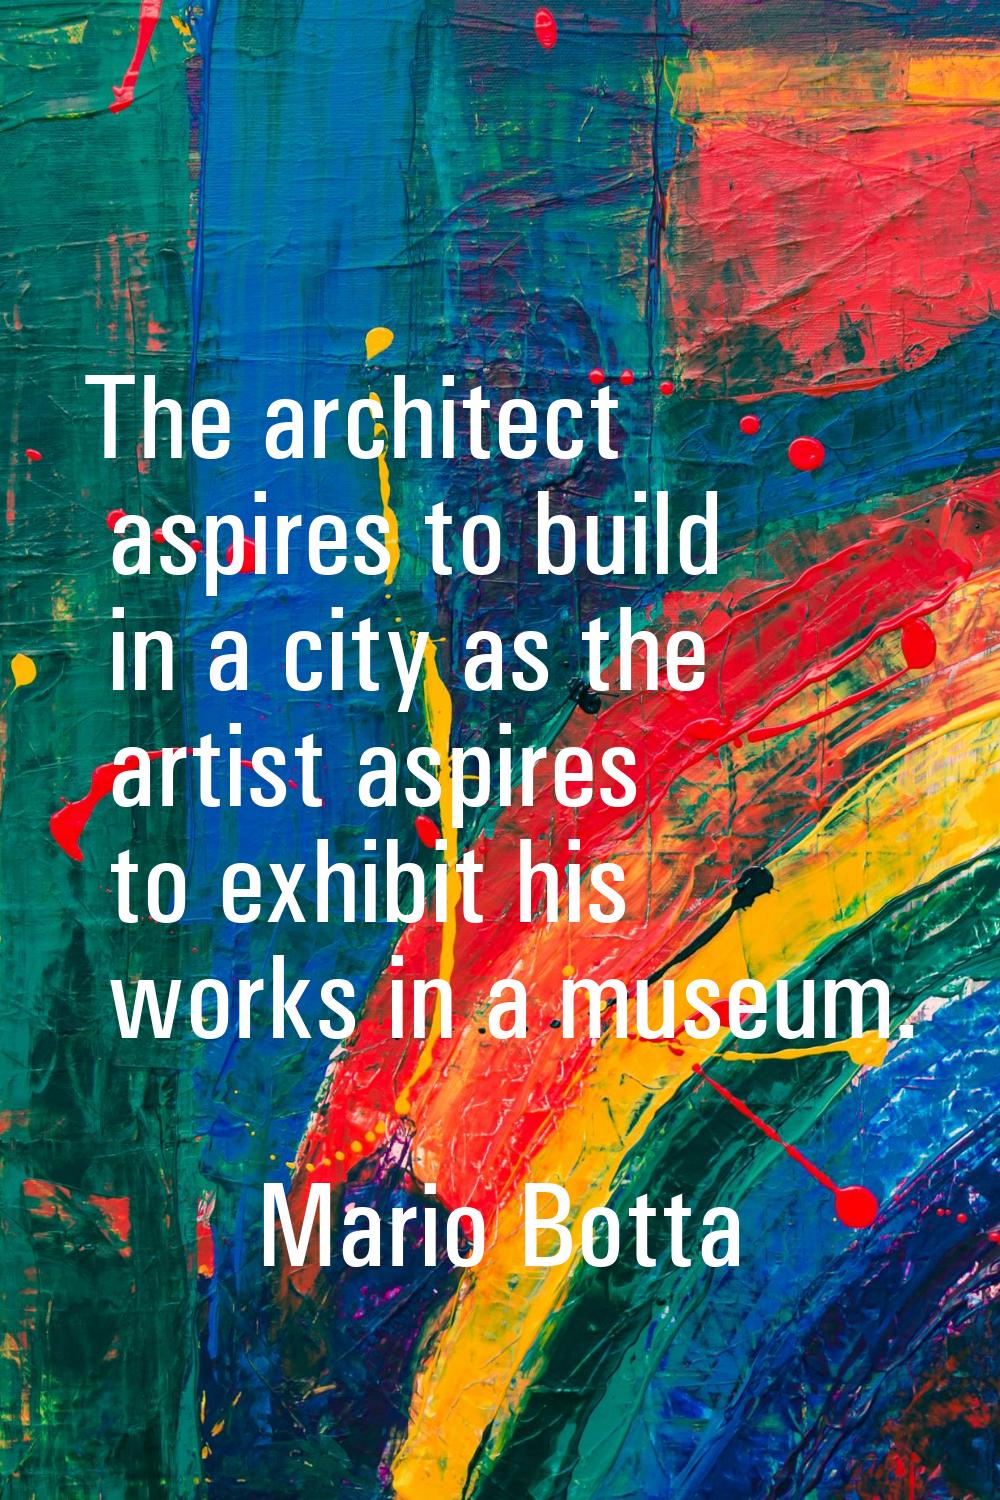 The architect aspires to build in a city as the artist aspires to exhibit his works in a museum.